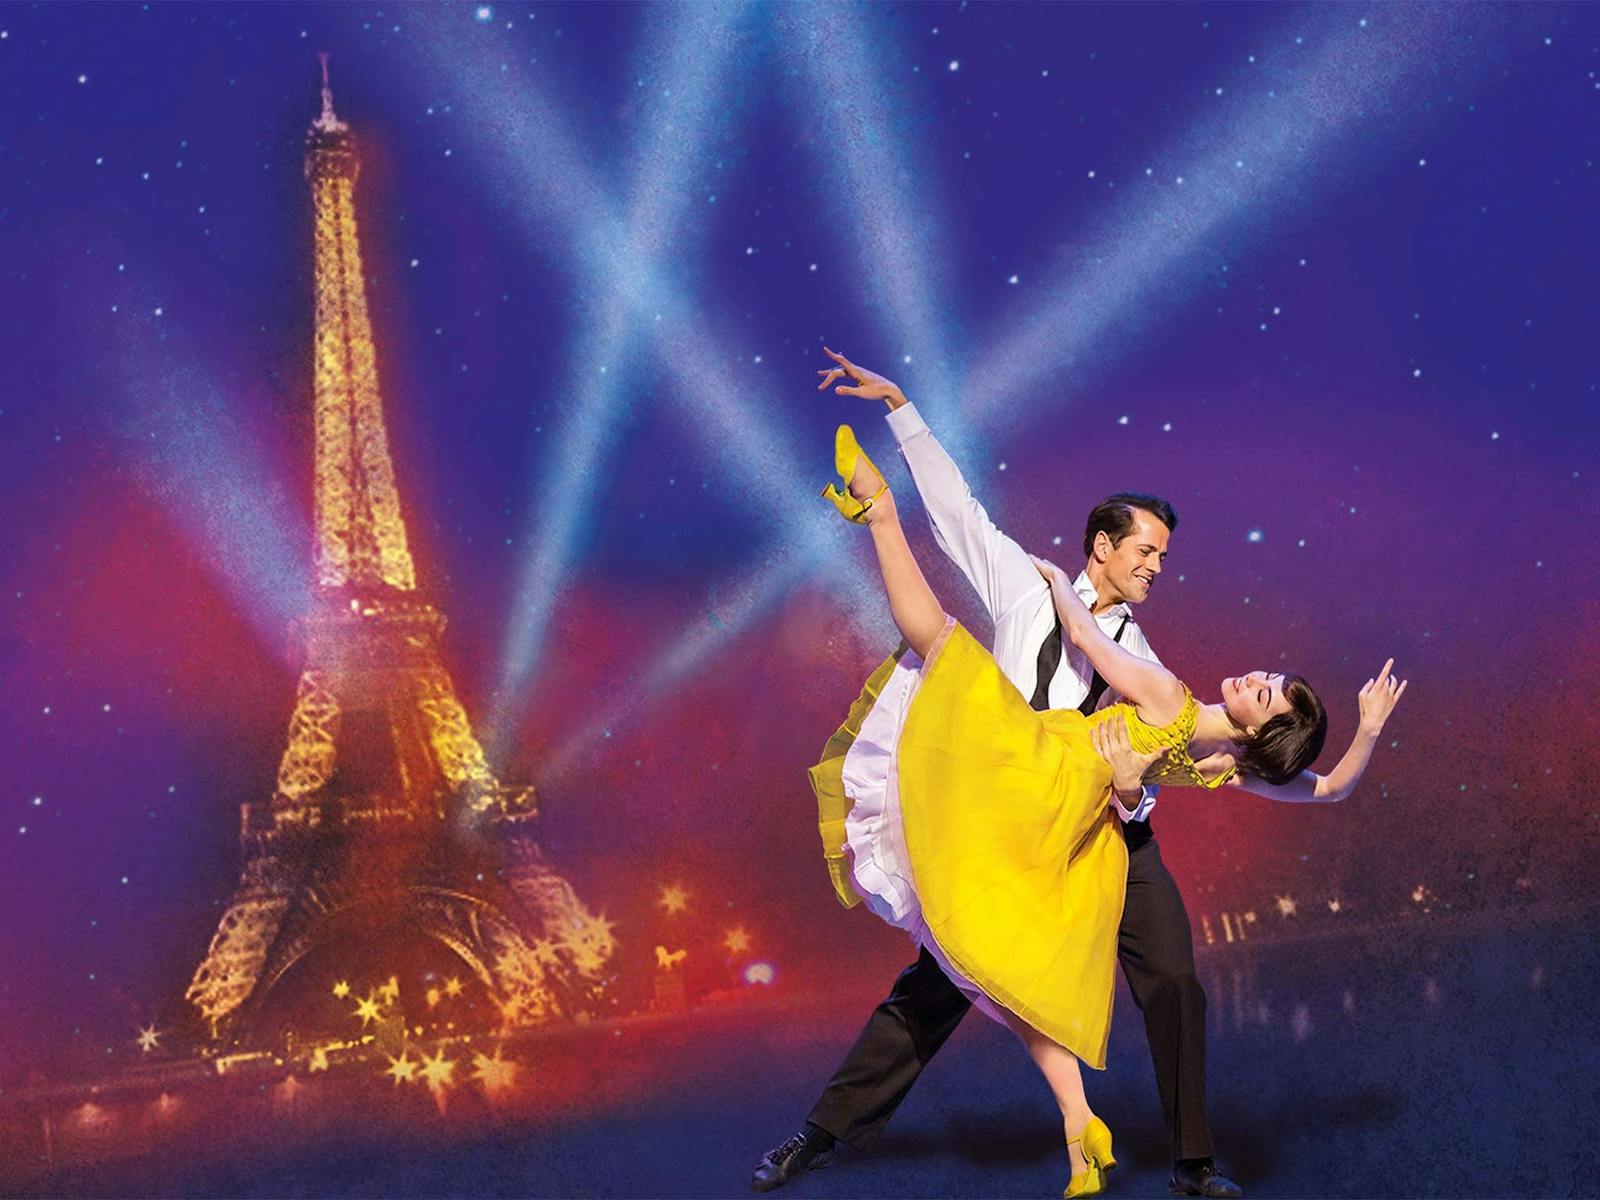 Image for An American in Paris